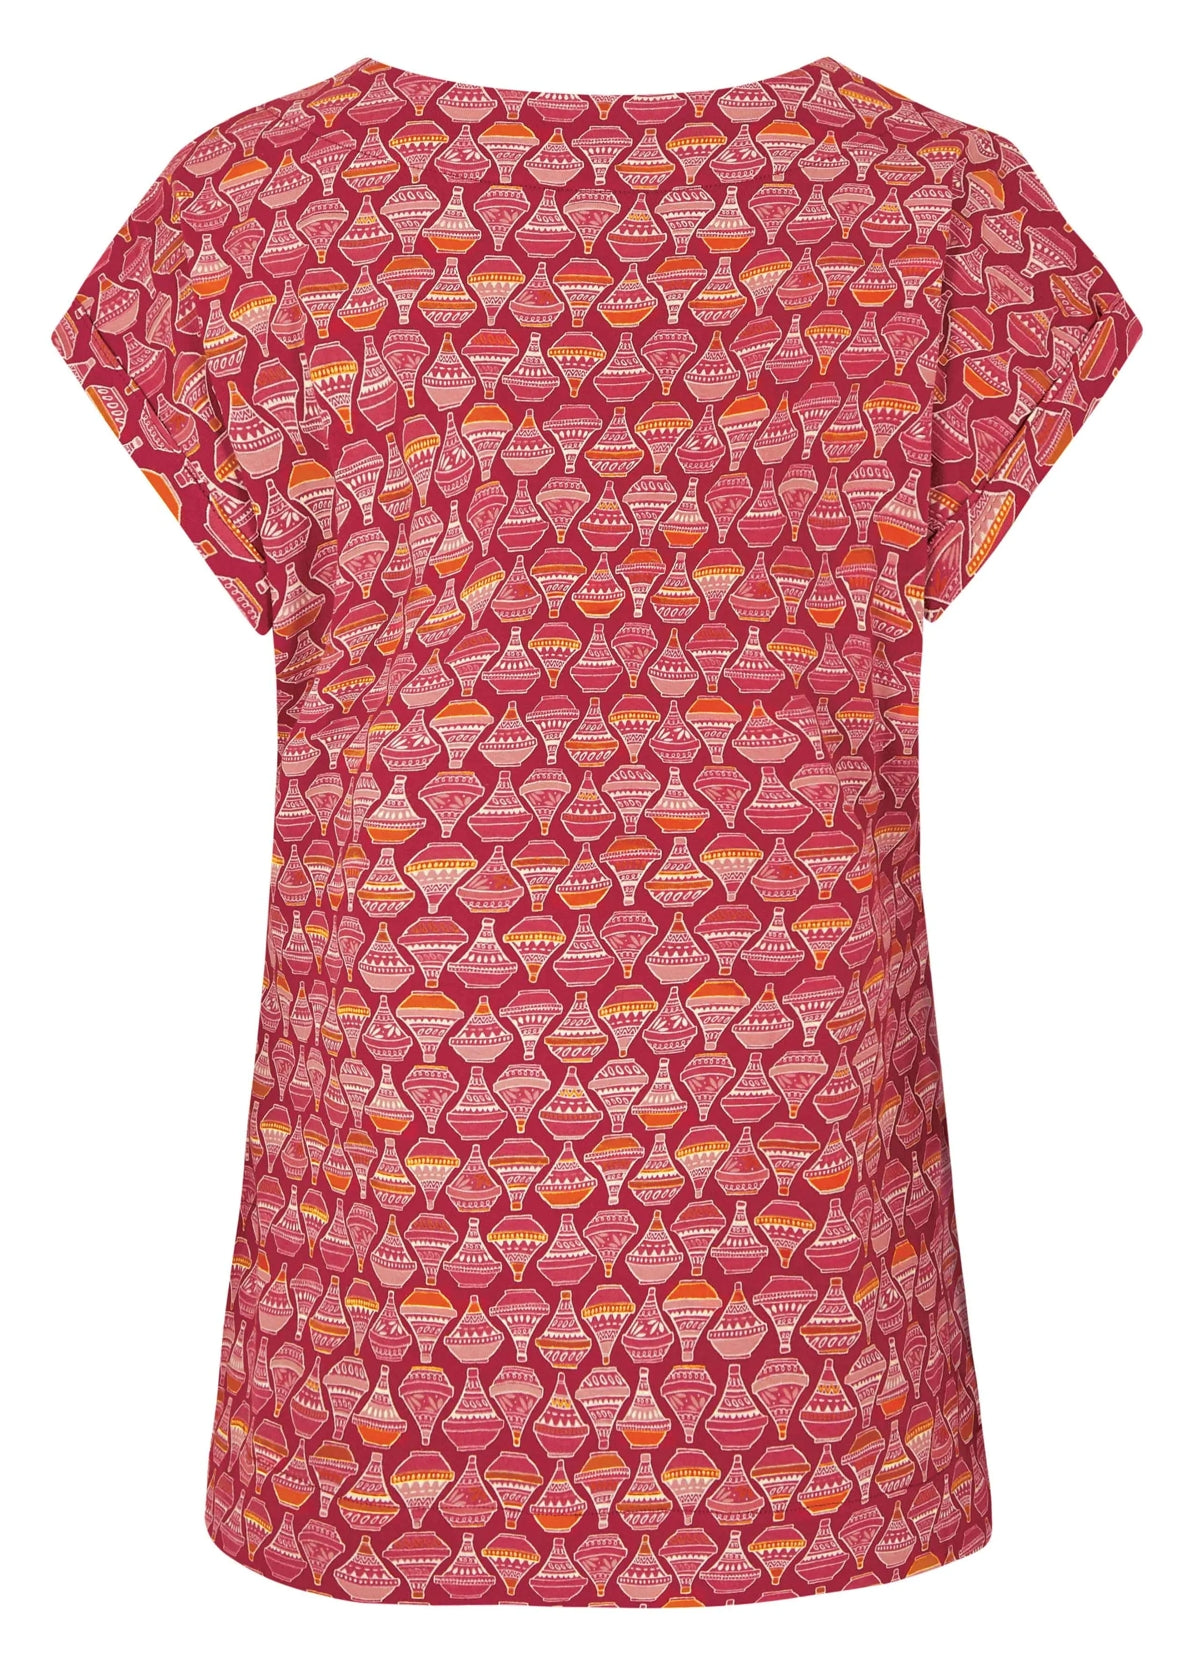 Weird Fish women's Paw Paw short sleeve t-shirt in Barberry Red with a Moroccan style tagine print.